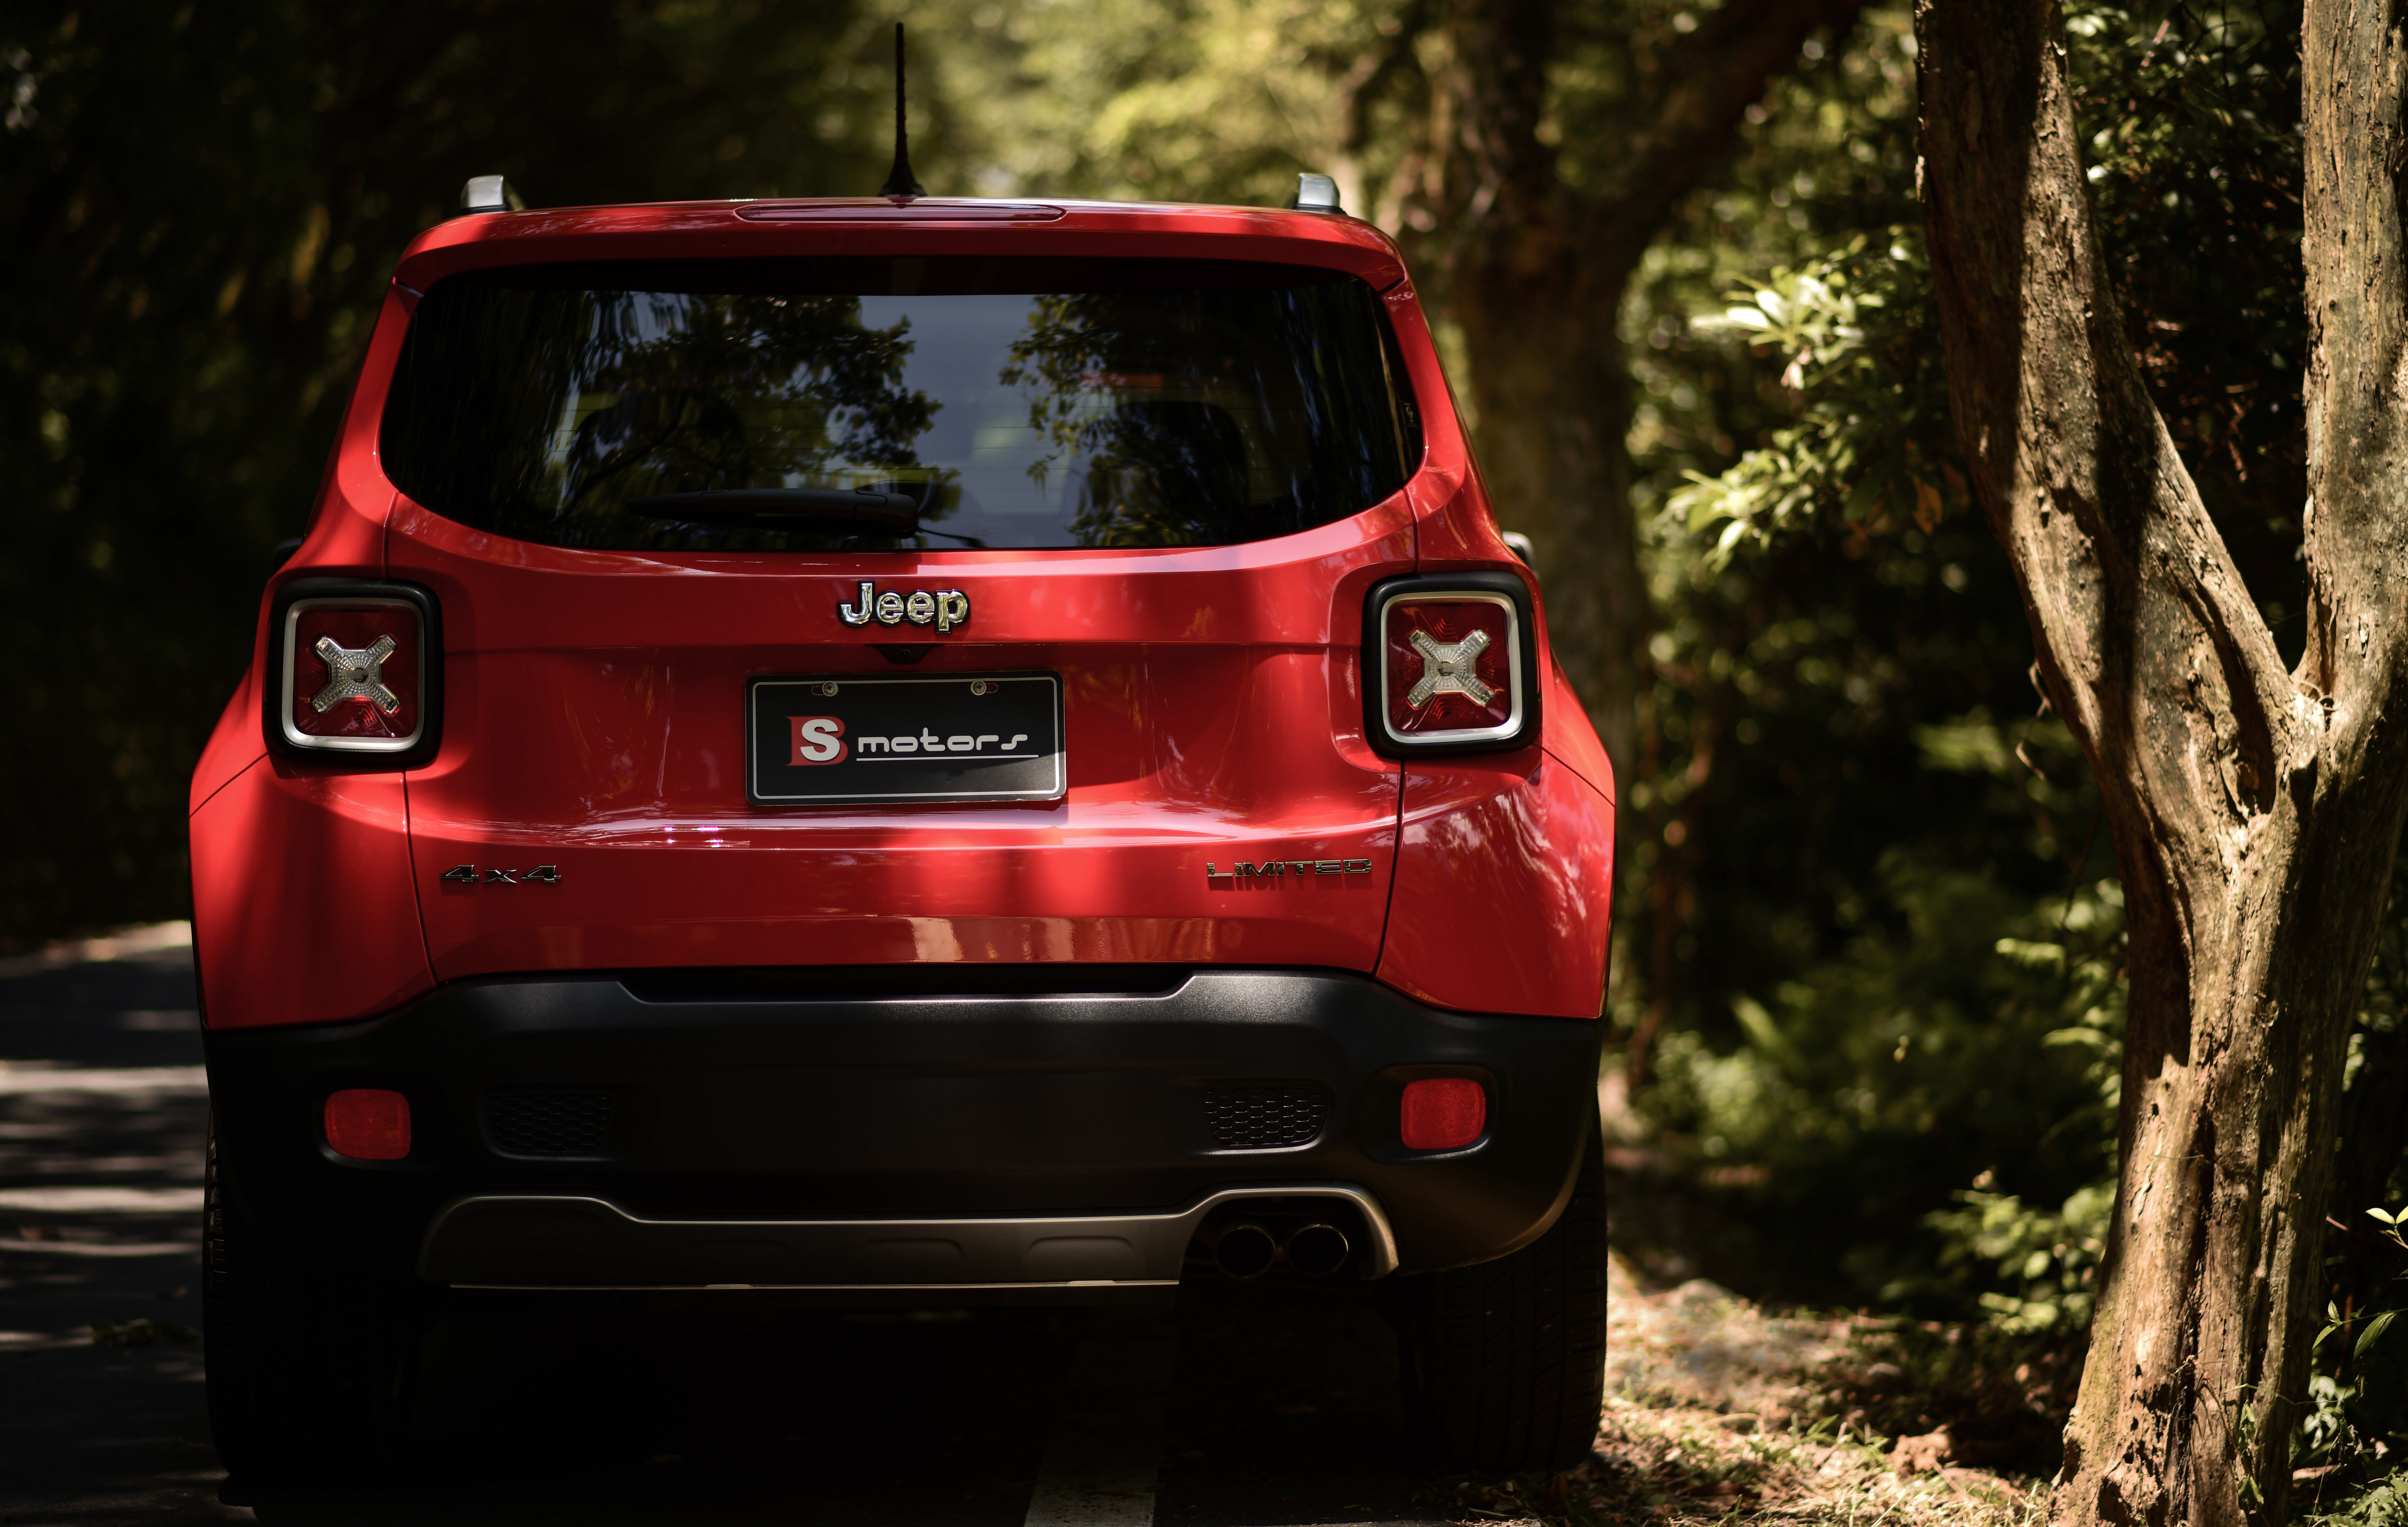 Jeep suv, jeep renegade, rear view, back view Free Stock Photos